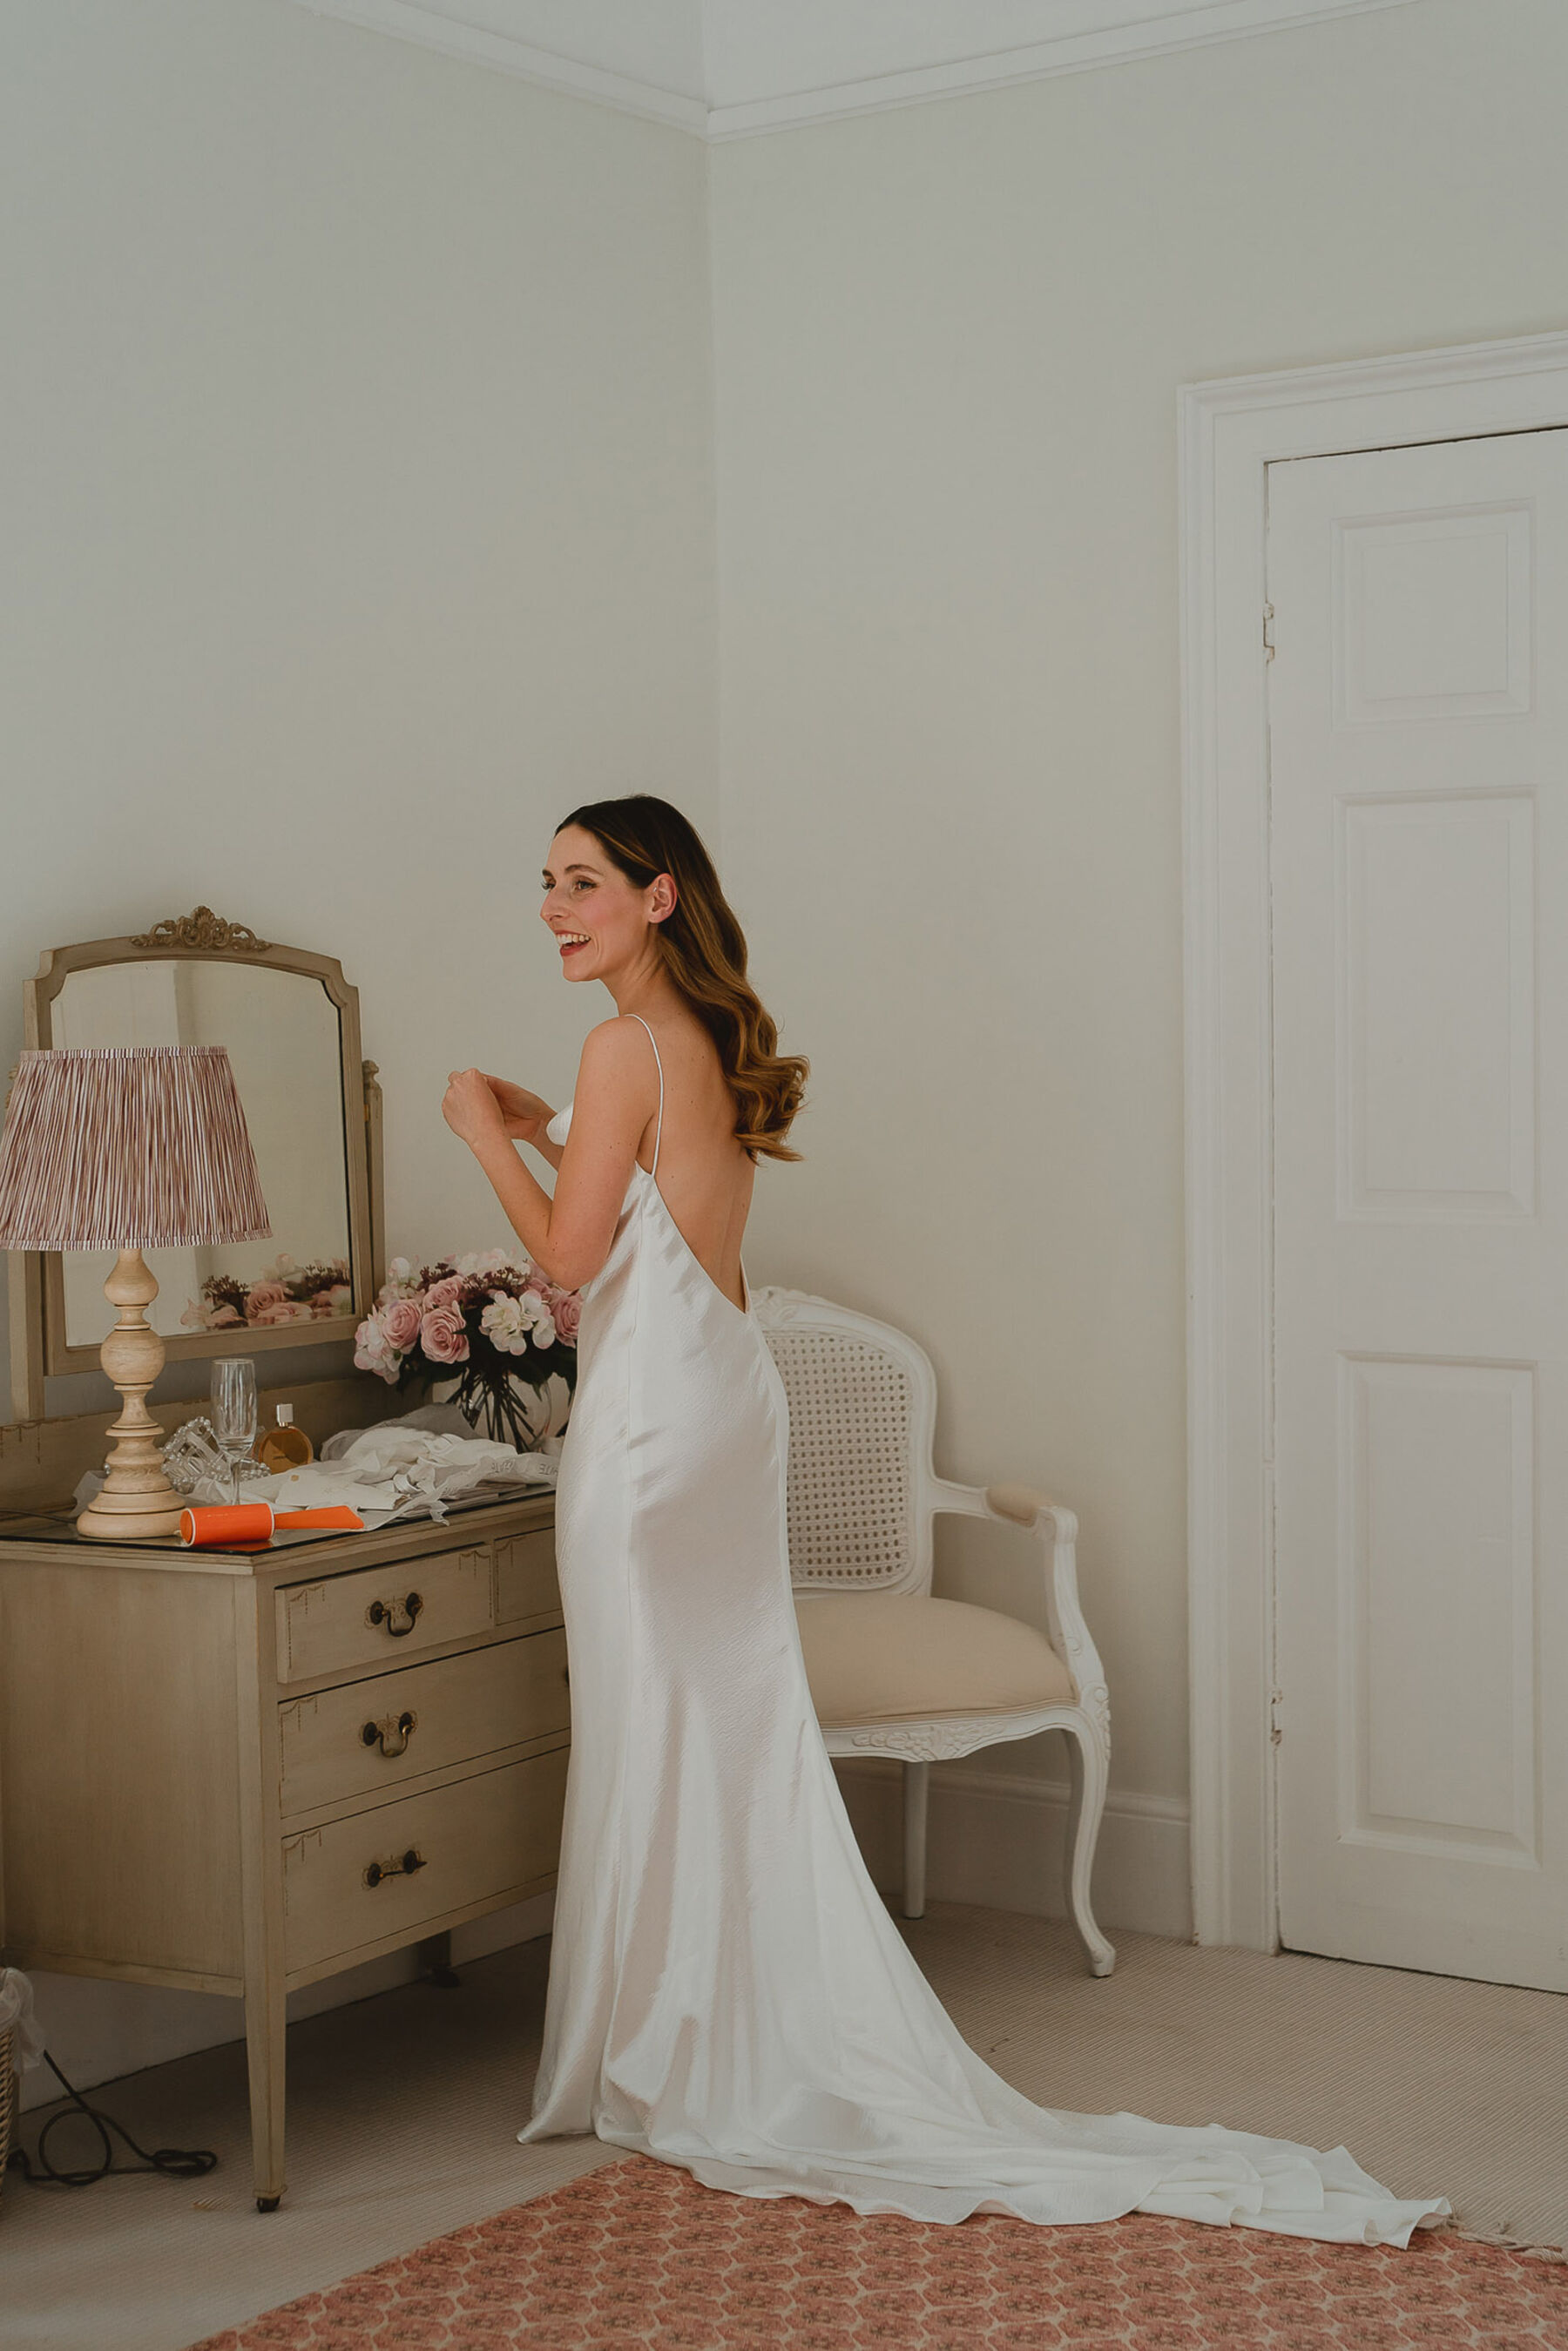 39 Newhite gown Butley Priory Wedding